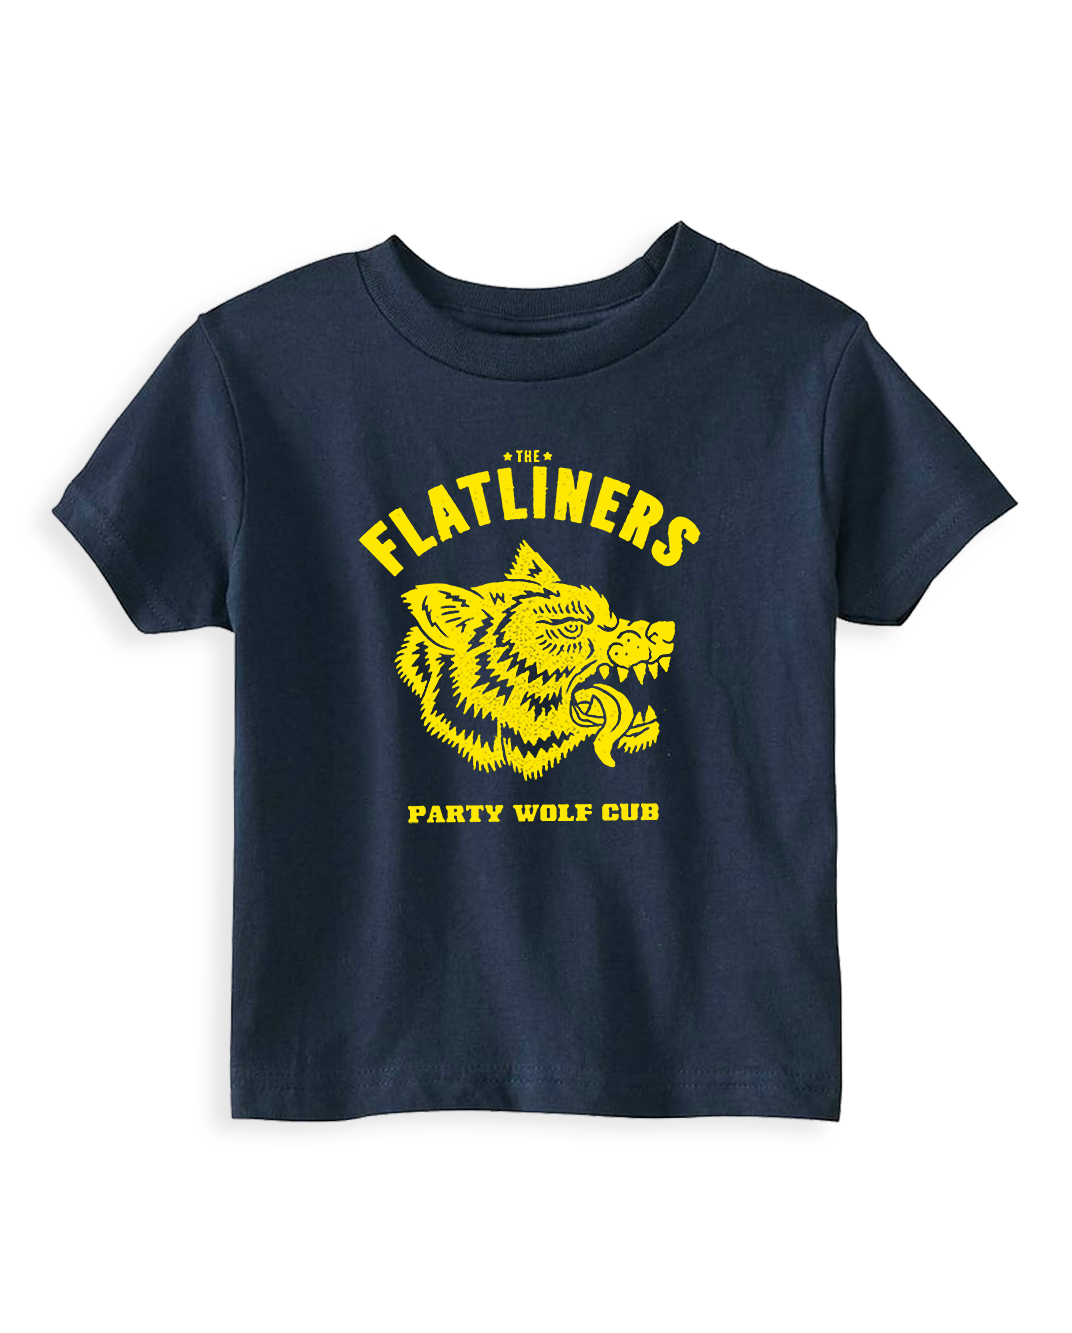 The Flatliners Party Wolf Cub Youth Tee